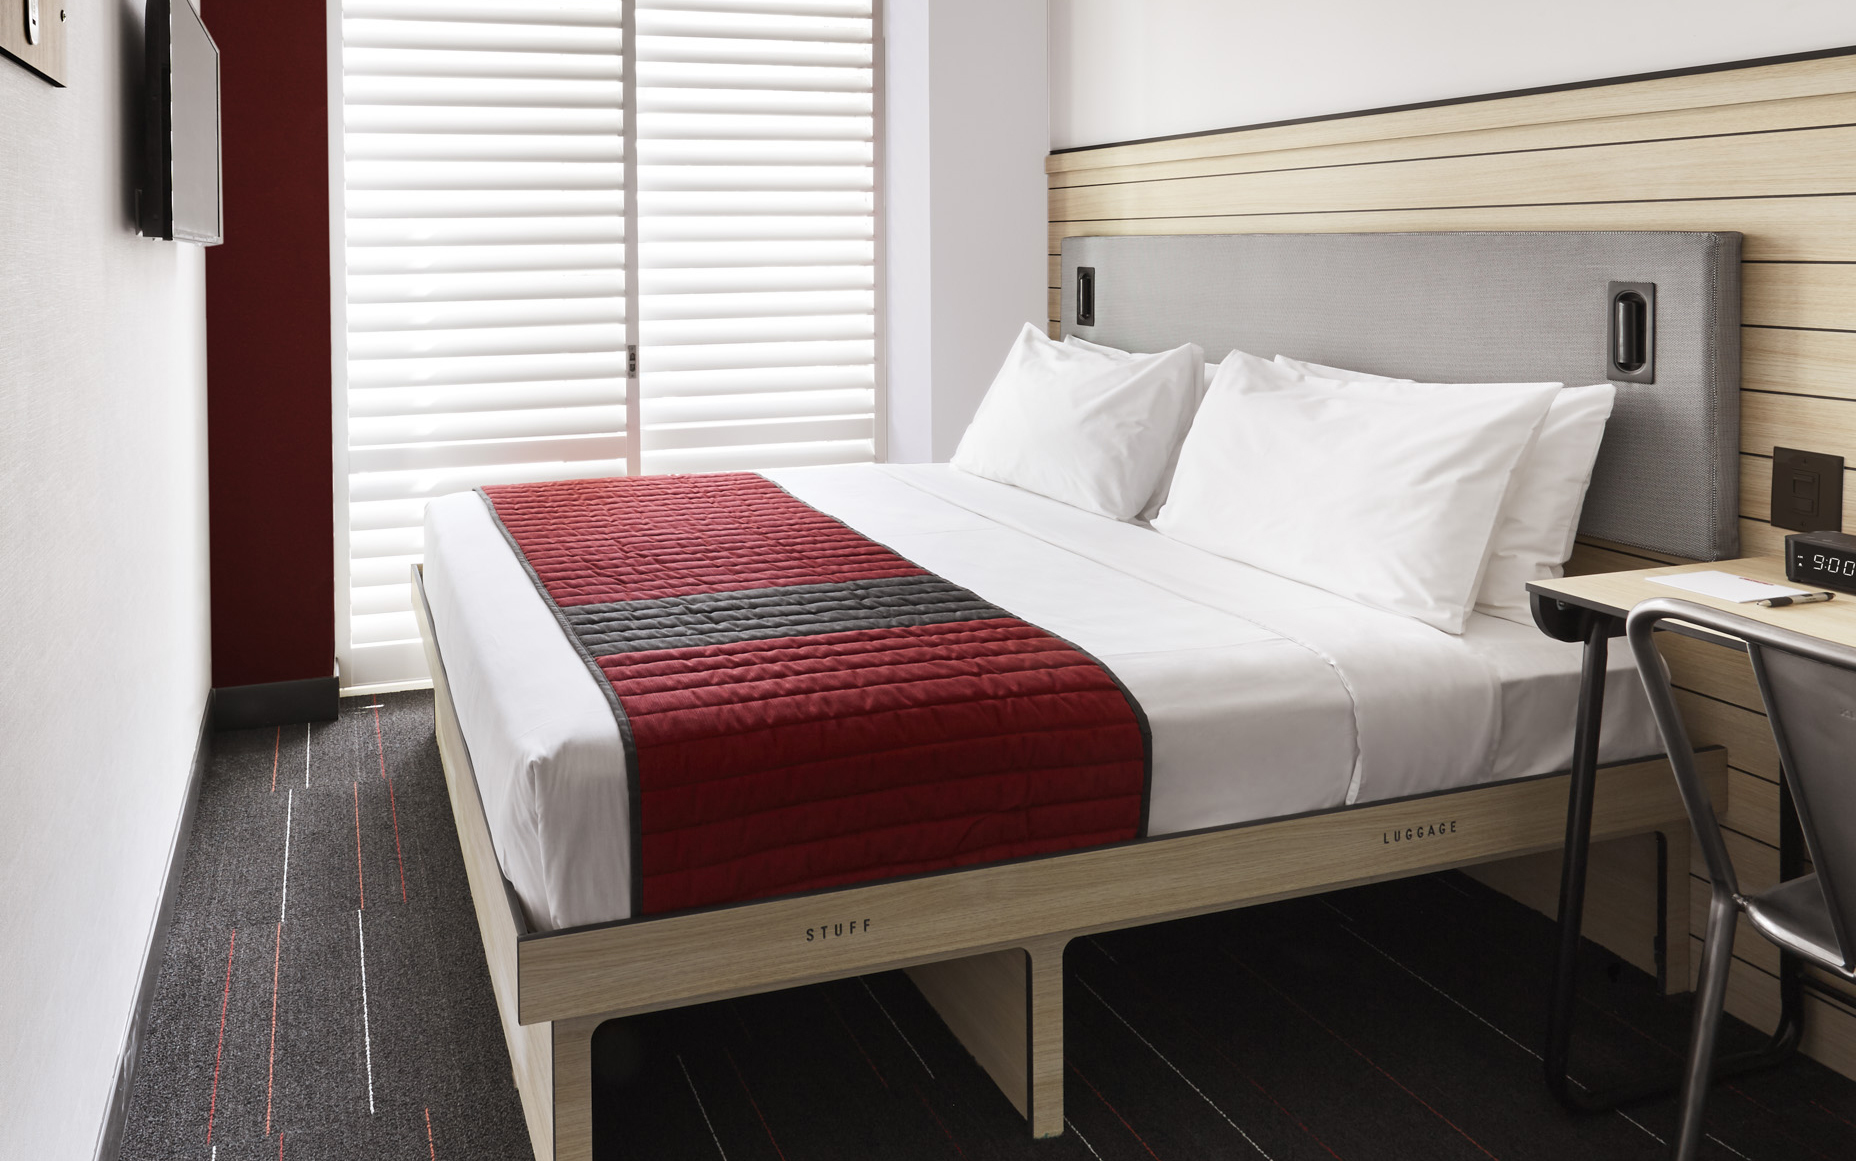 Queen bed with red and white cover in small room